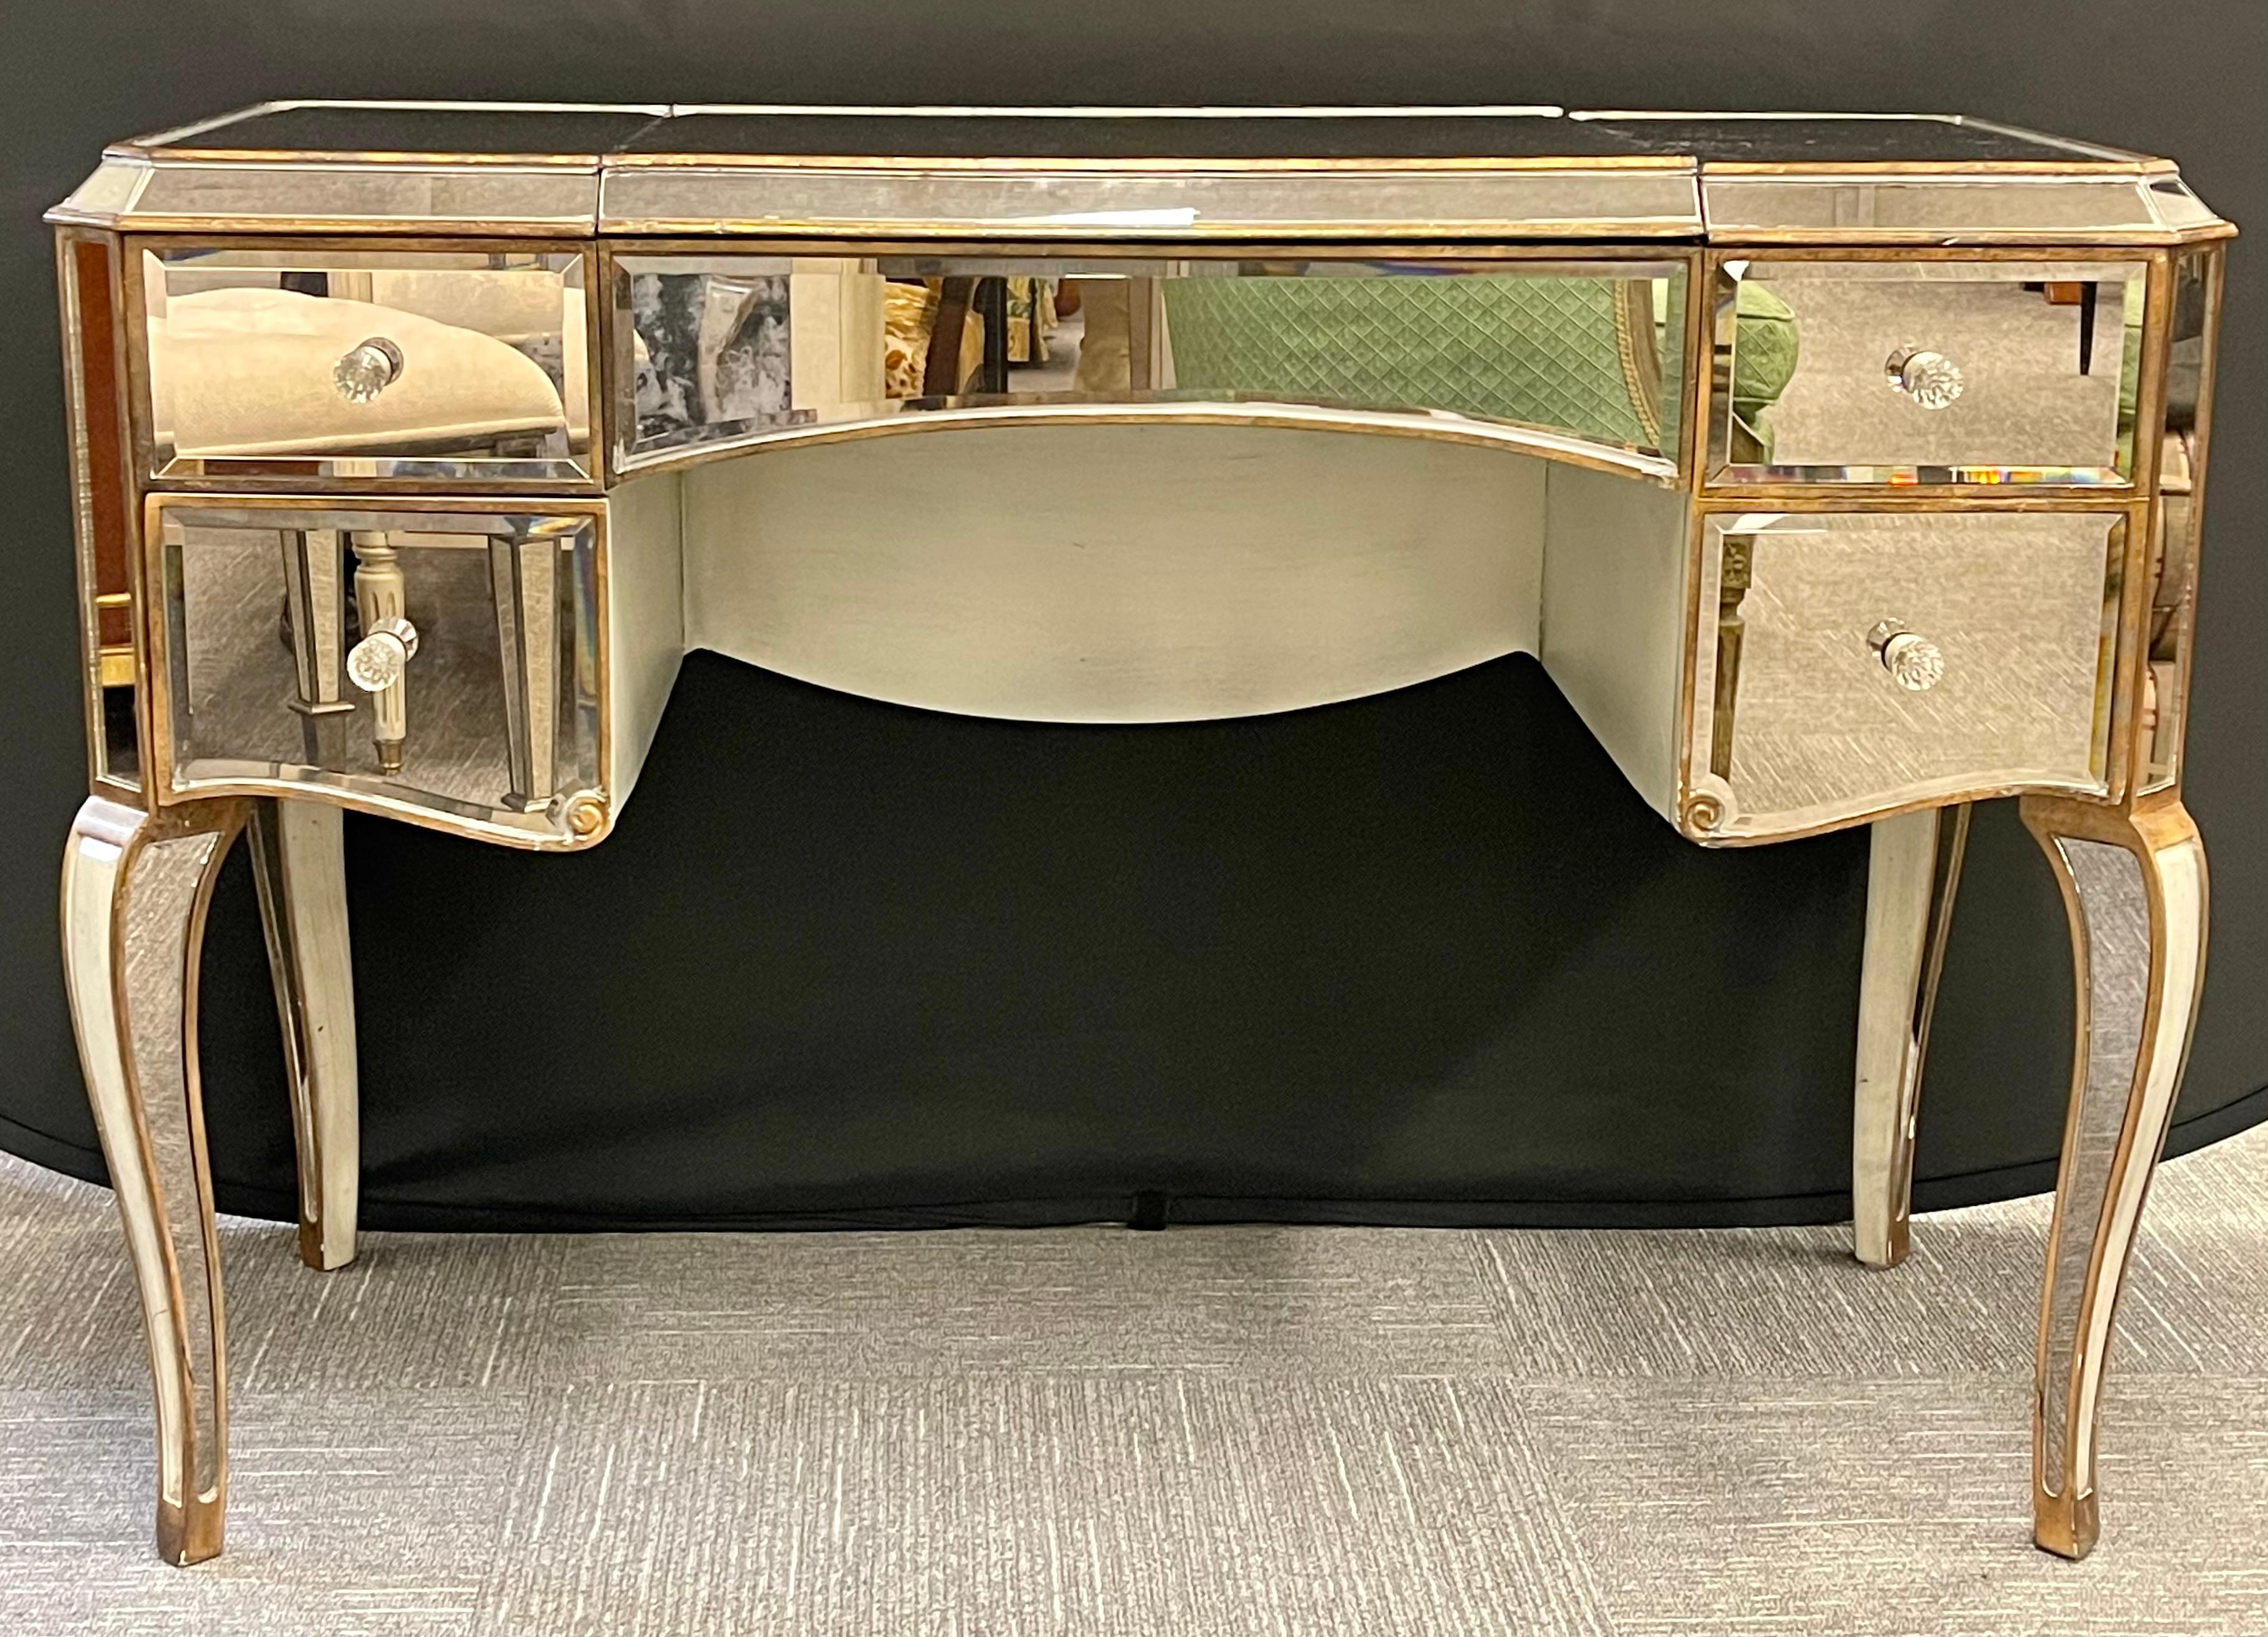 Hollywood Regency style Mirrored Vanity with bench. Finely crafted vanity desk having all beveled mirror inserts with a fitted interior and a flip up make up mirror. Dimensions -31